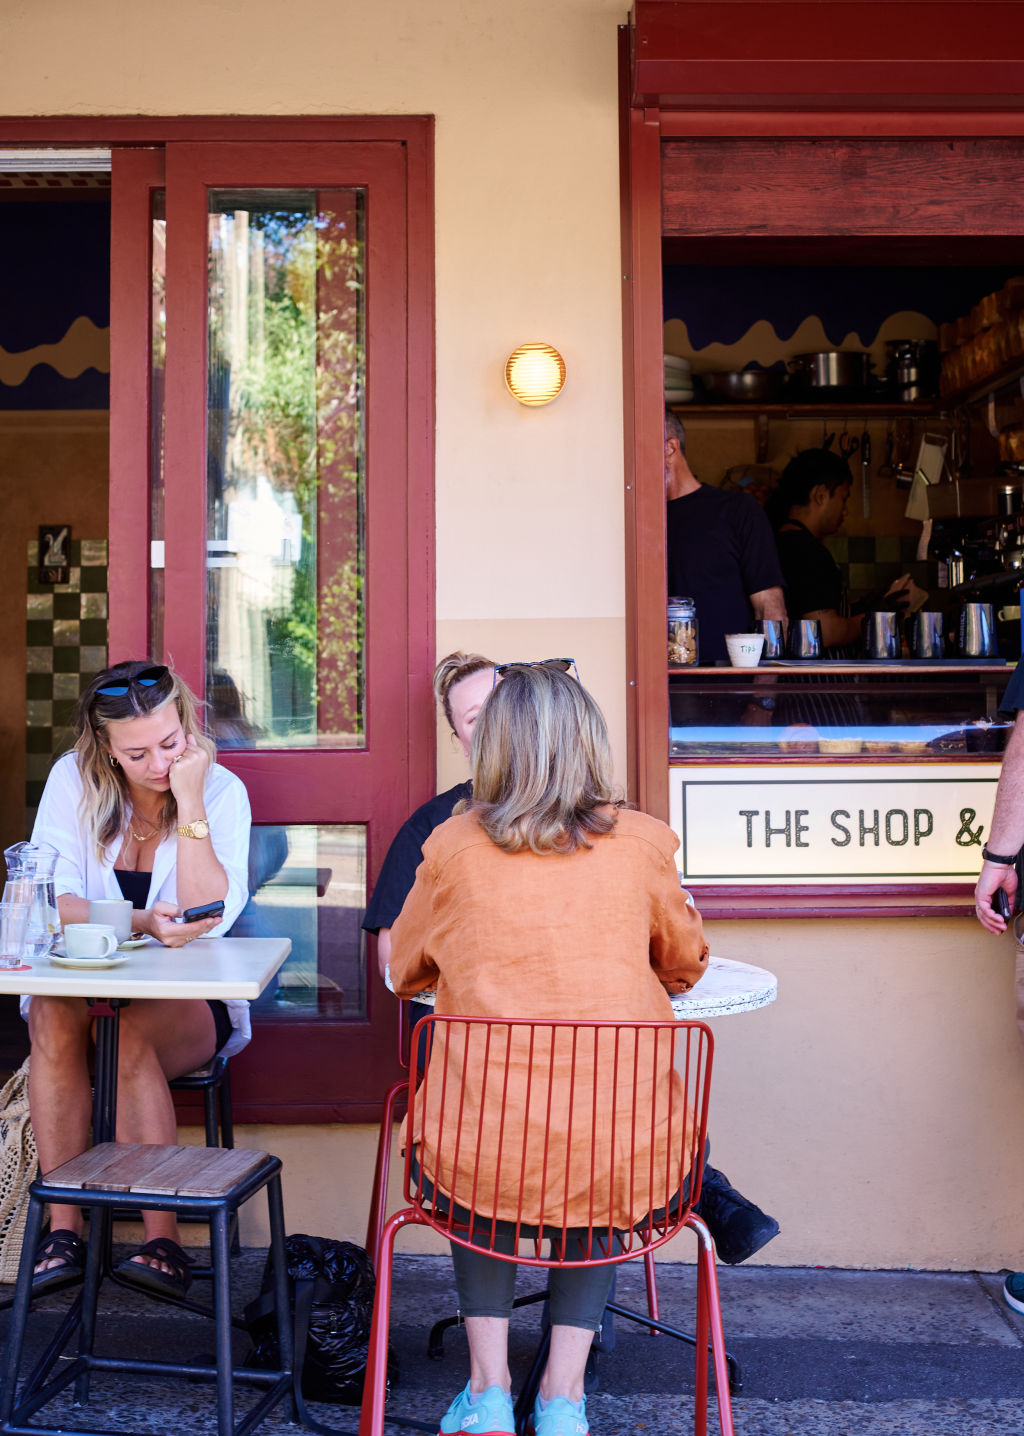 Meagher says The Shop & Wine Bar is one of his favourite local experiences. Photo: Supplied